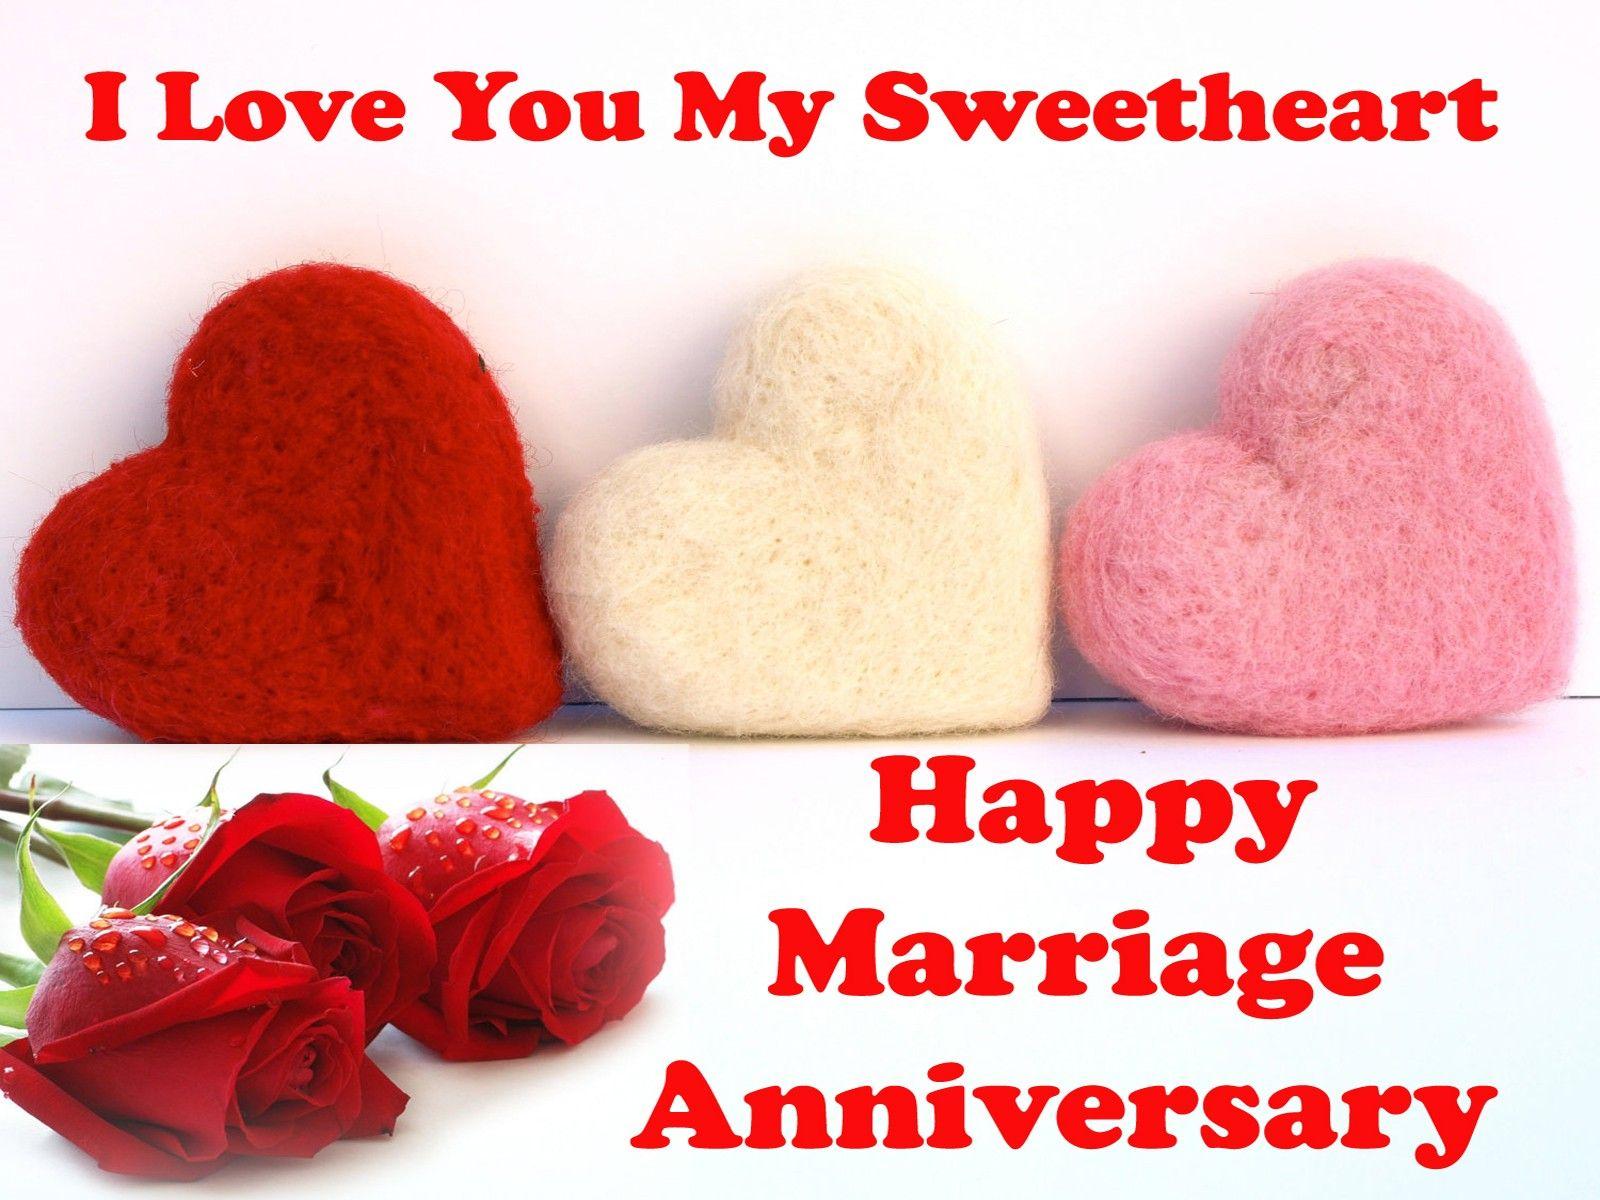 happy anniversary wishes to sweetheart husband. Marriage